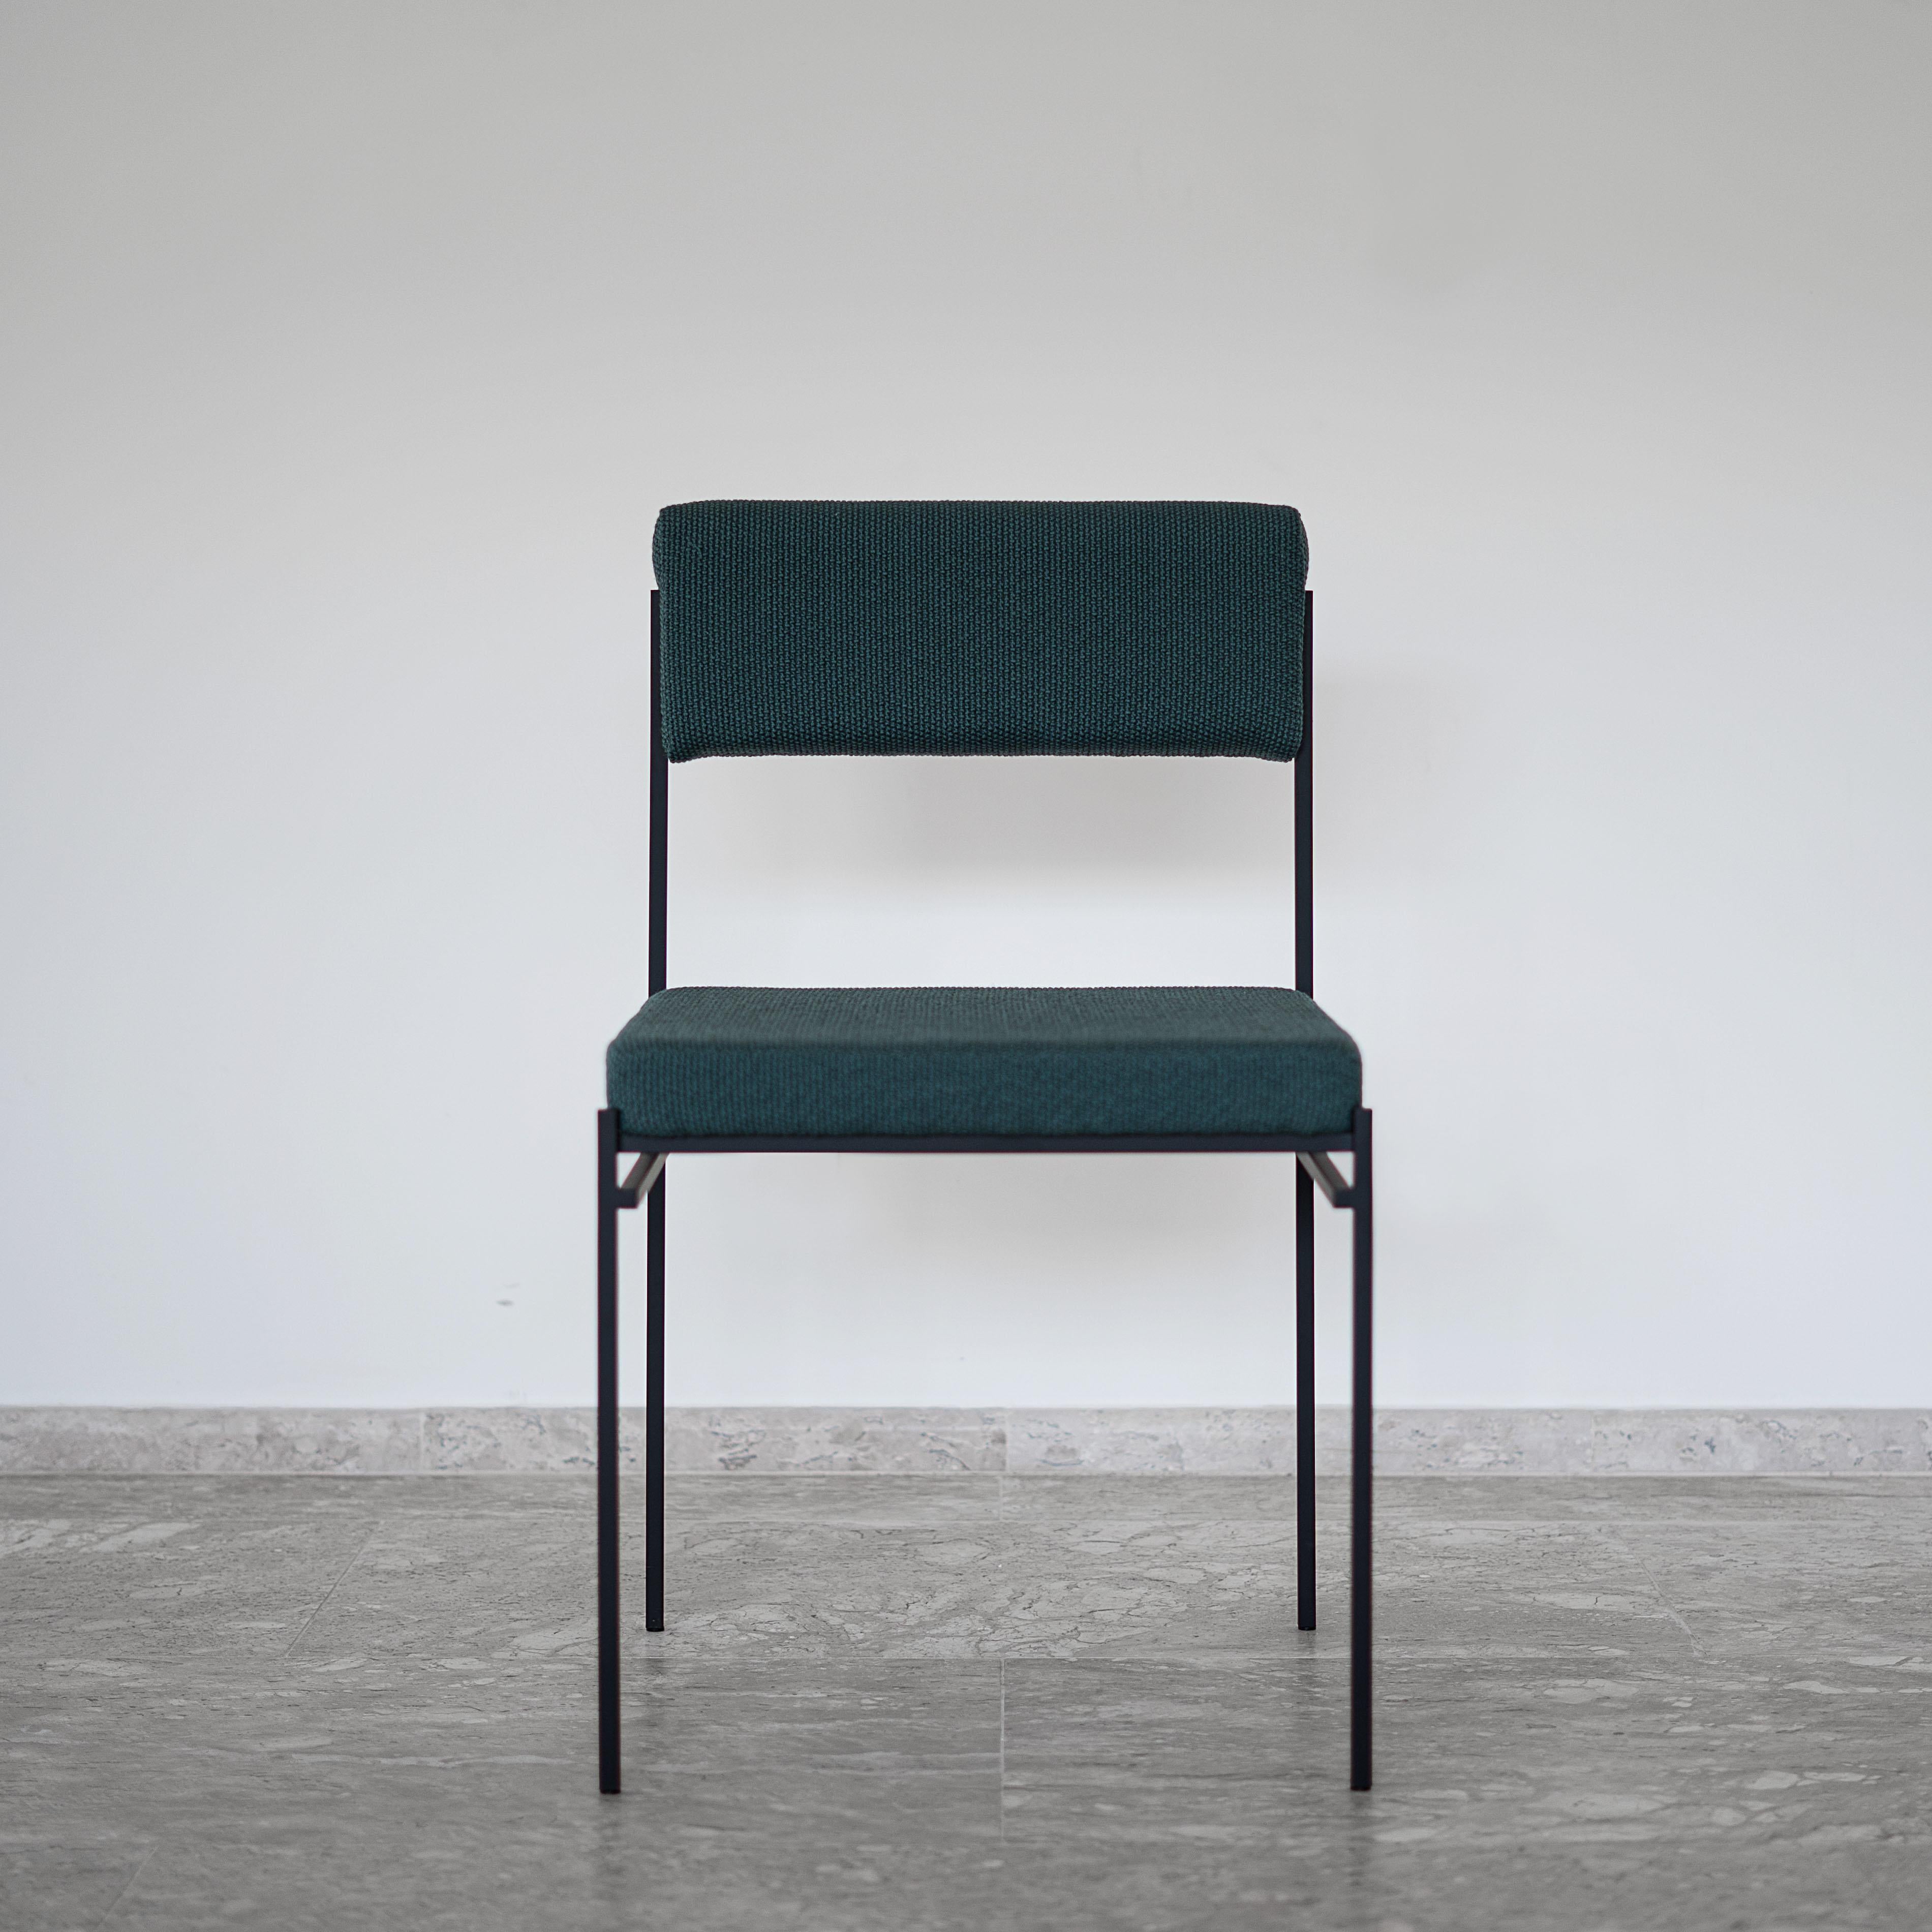 This contemporary armchair is inspired by modern Brazilian design. With a square DNA, the aim is to create a geometric and essential chair. All structural elements constitutes its functioning and are sized to ensure maximum lightness without